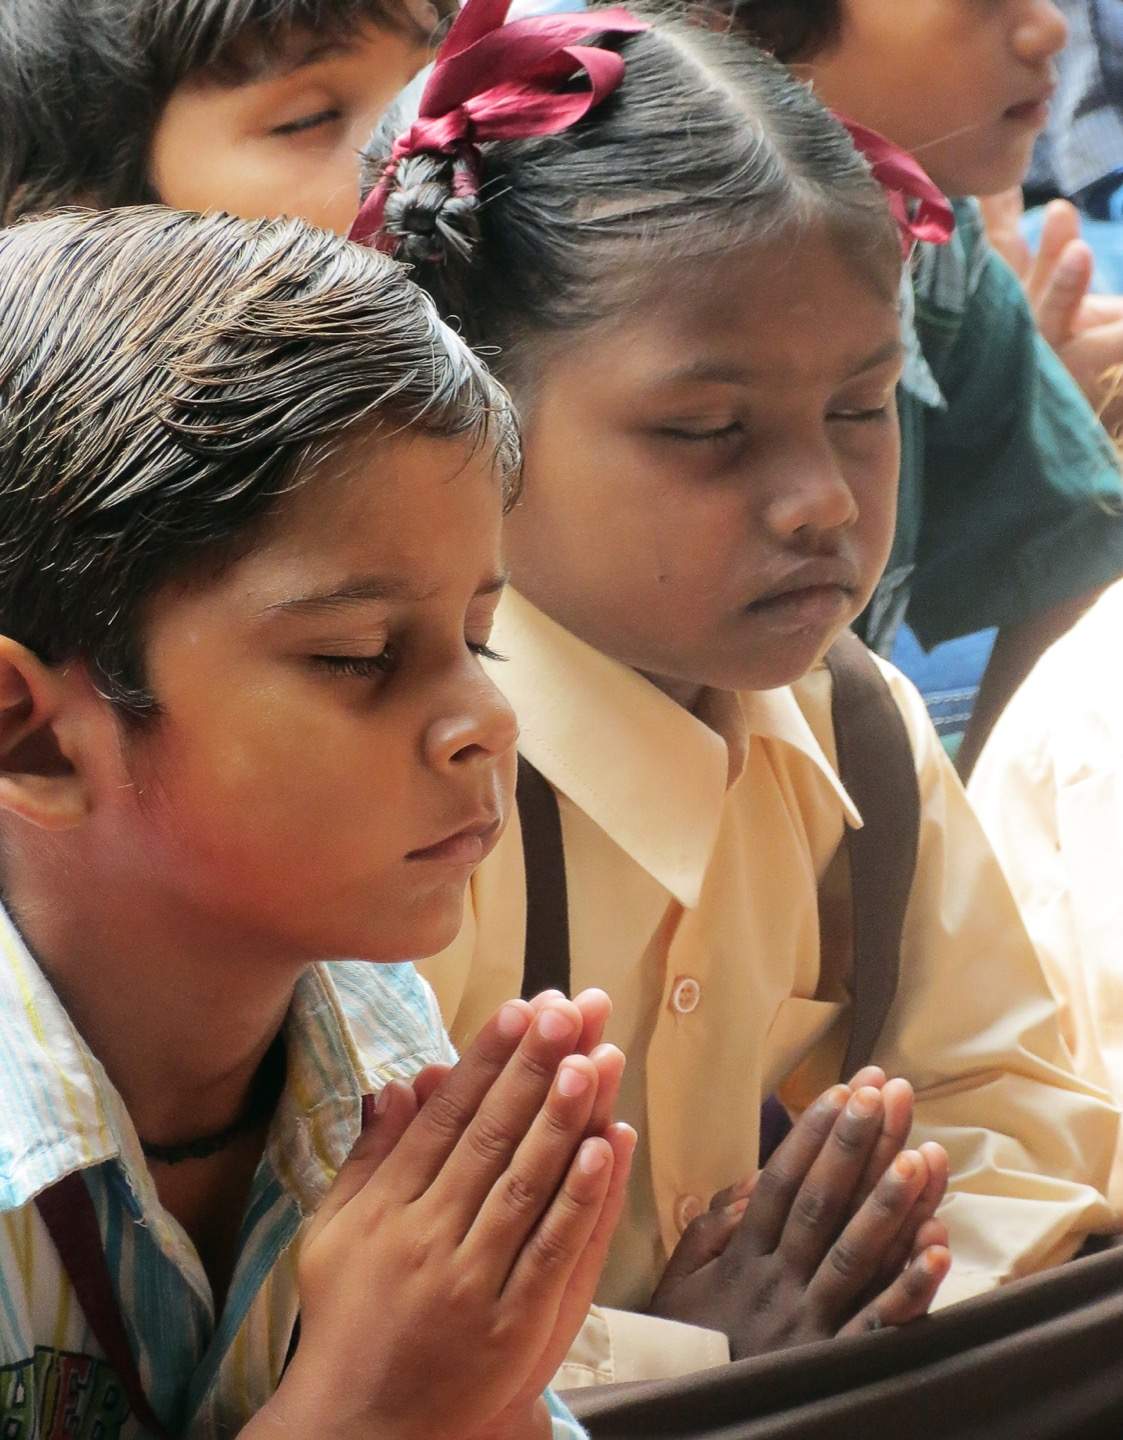 Some of the strongest examples of faith and prayer come from young children who come to Christ through IGO’s ministries in India’s city slums.